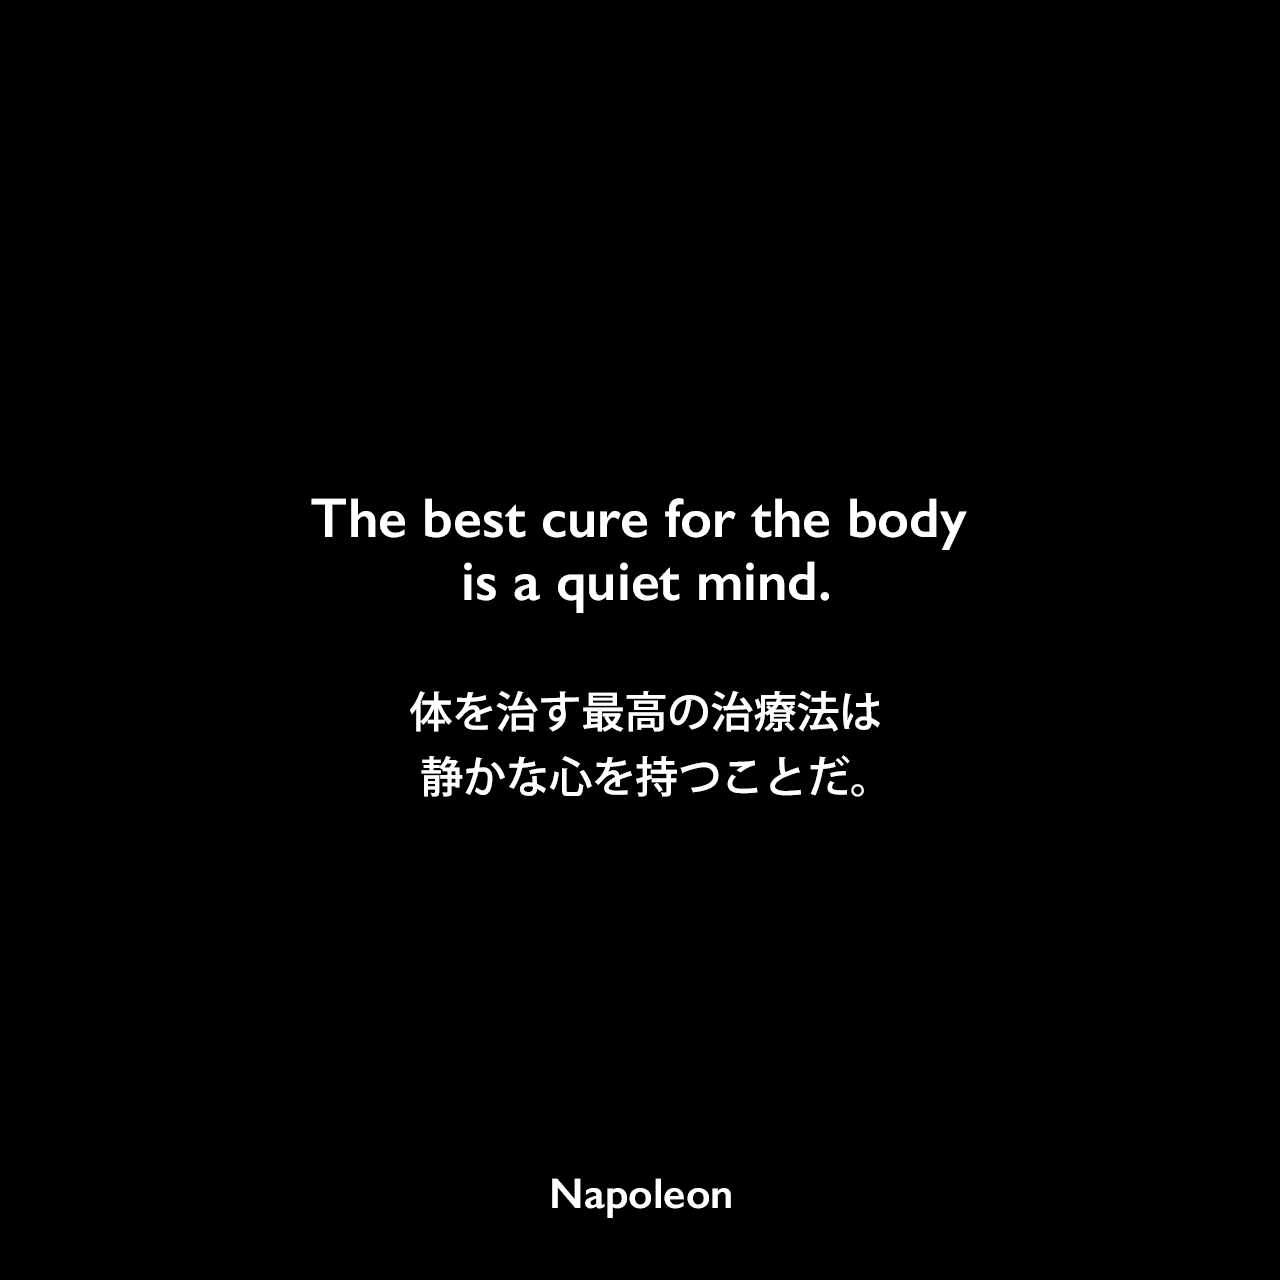 The best cure for the body is a quiet mind.体を治す最高の治療法は静かな心を持つことだ。Napoleon